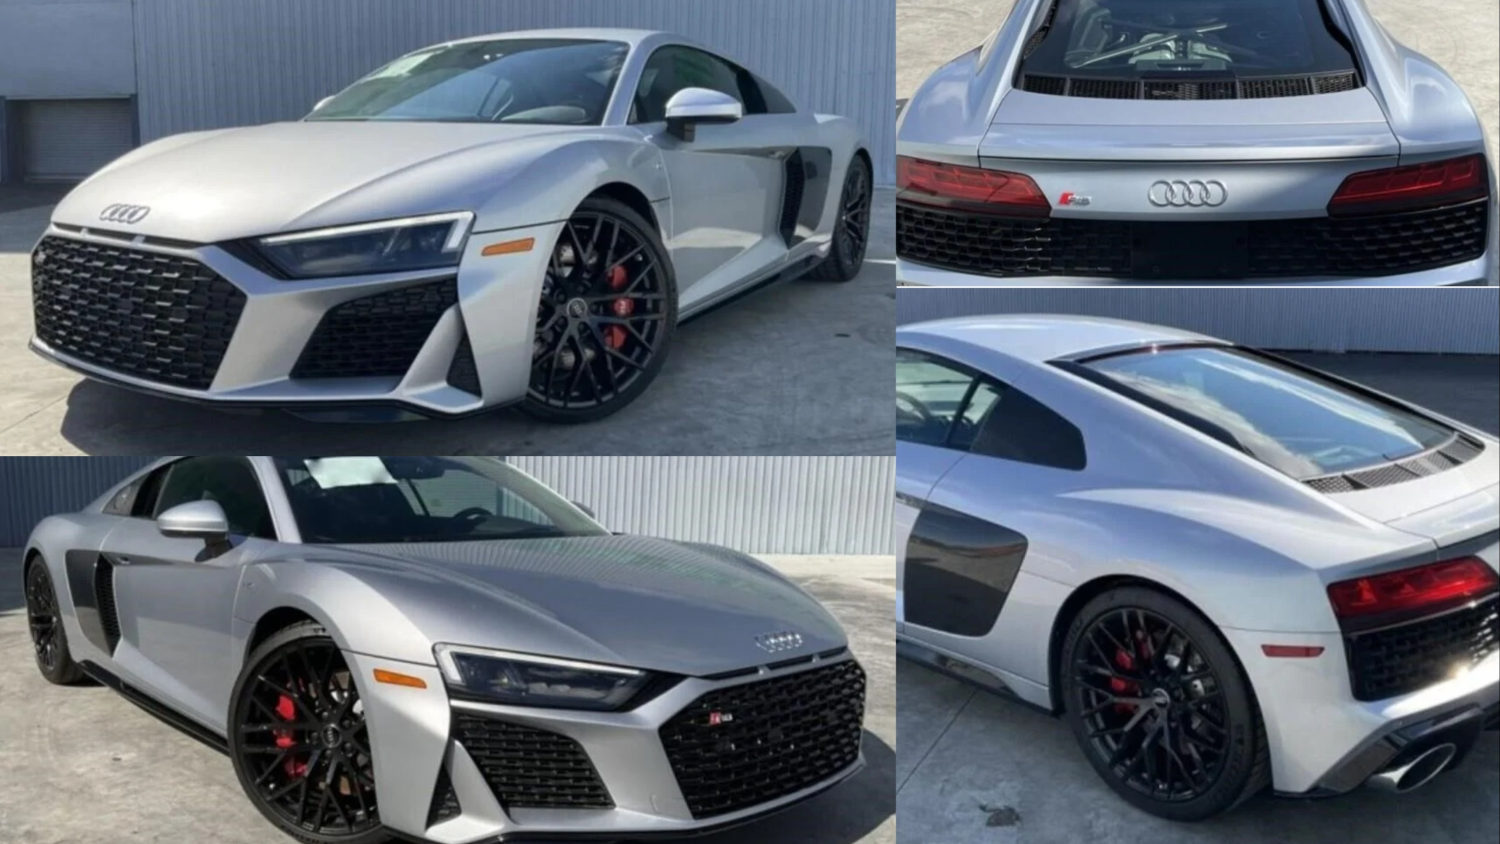 An Audi R8 up for government auction